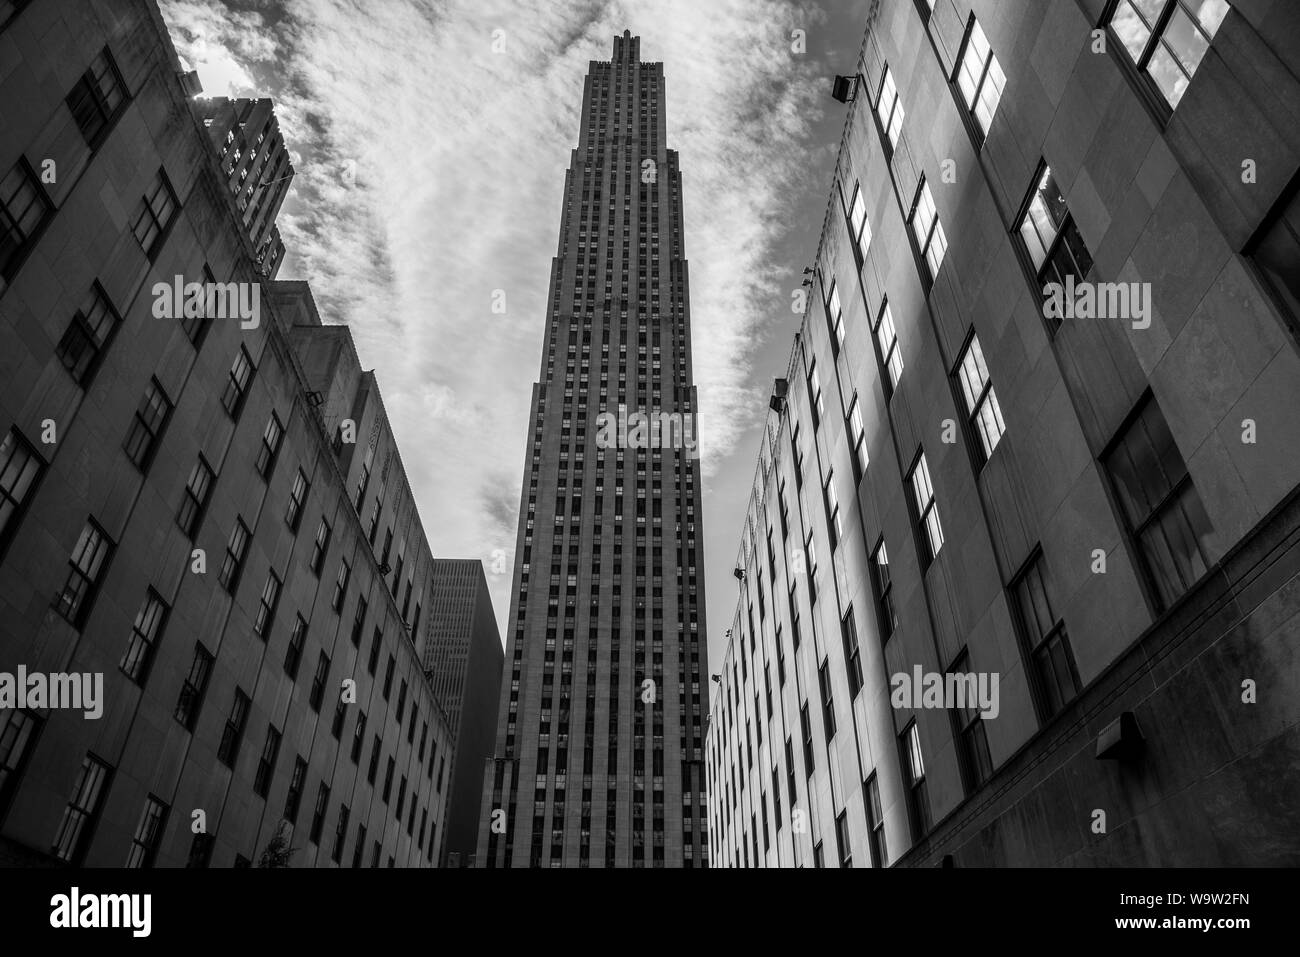 The Rockefeller Center with the Rockefeller plaza in the heart of Manhattan Stock Photo